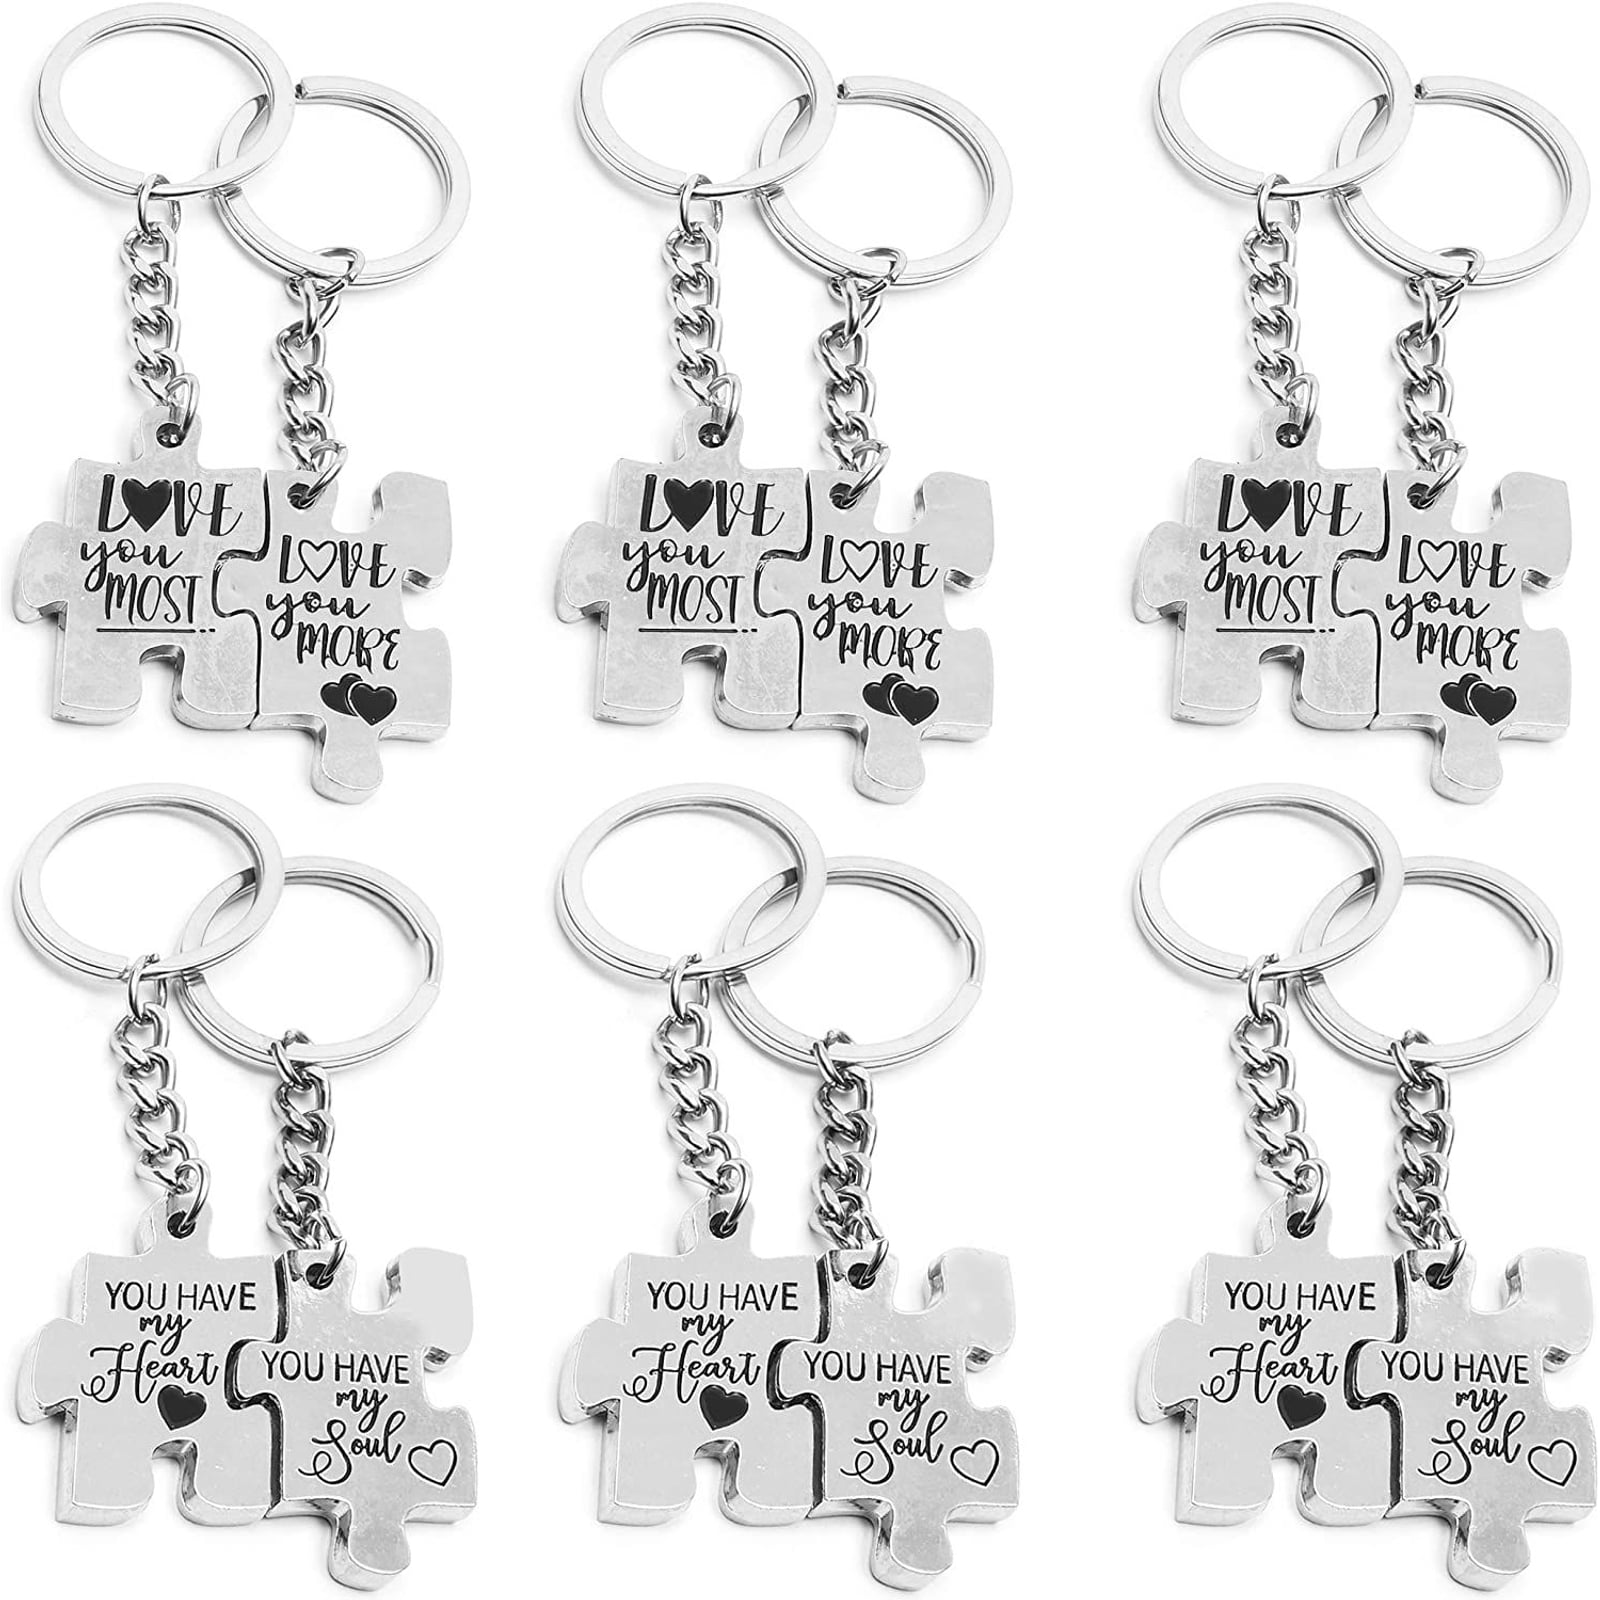 Apple Pencil Cup charm Principal Thanks for helping me grow Keyring Thank you Gift for Teacher Keychain CLEARANCE SALE women or men birthday present from student or coworker Daycare Key Chain